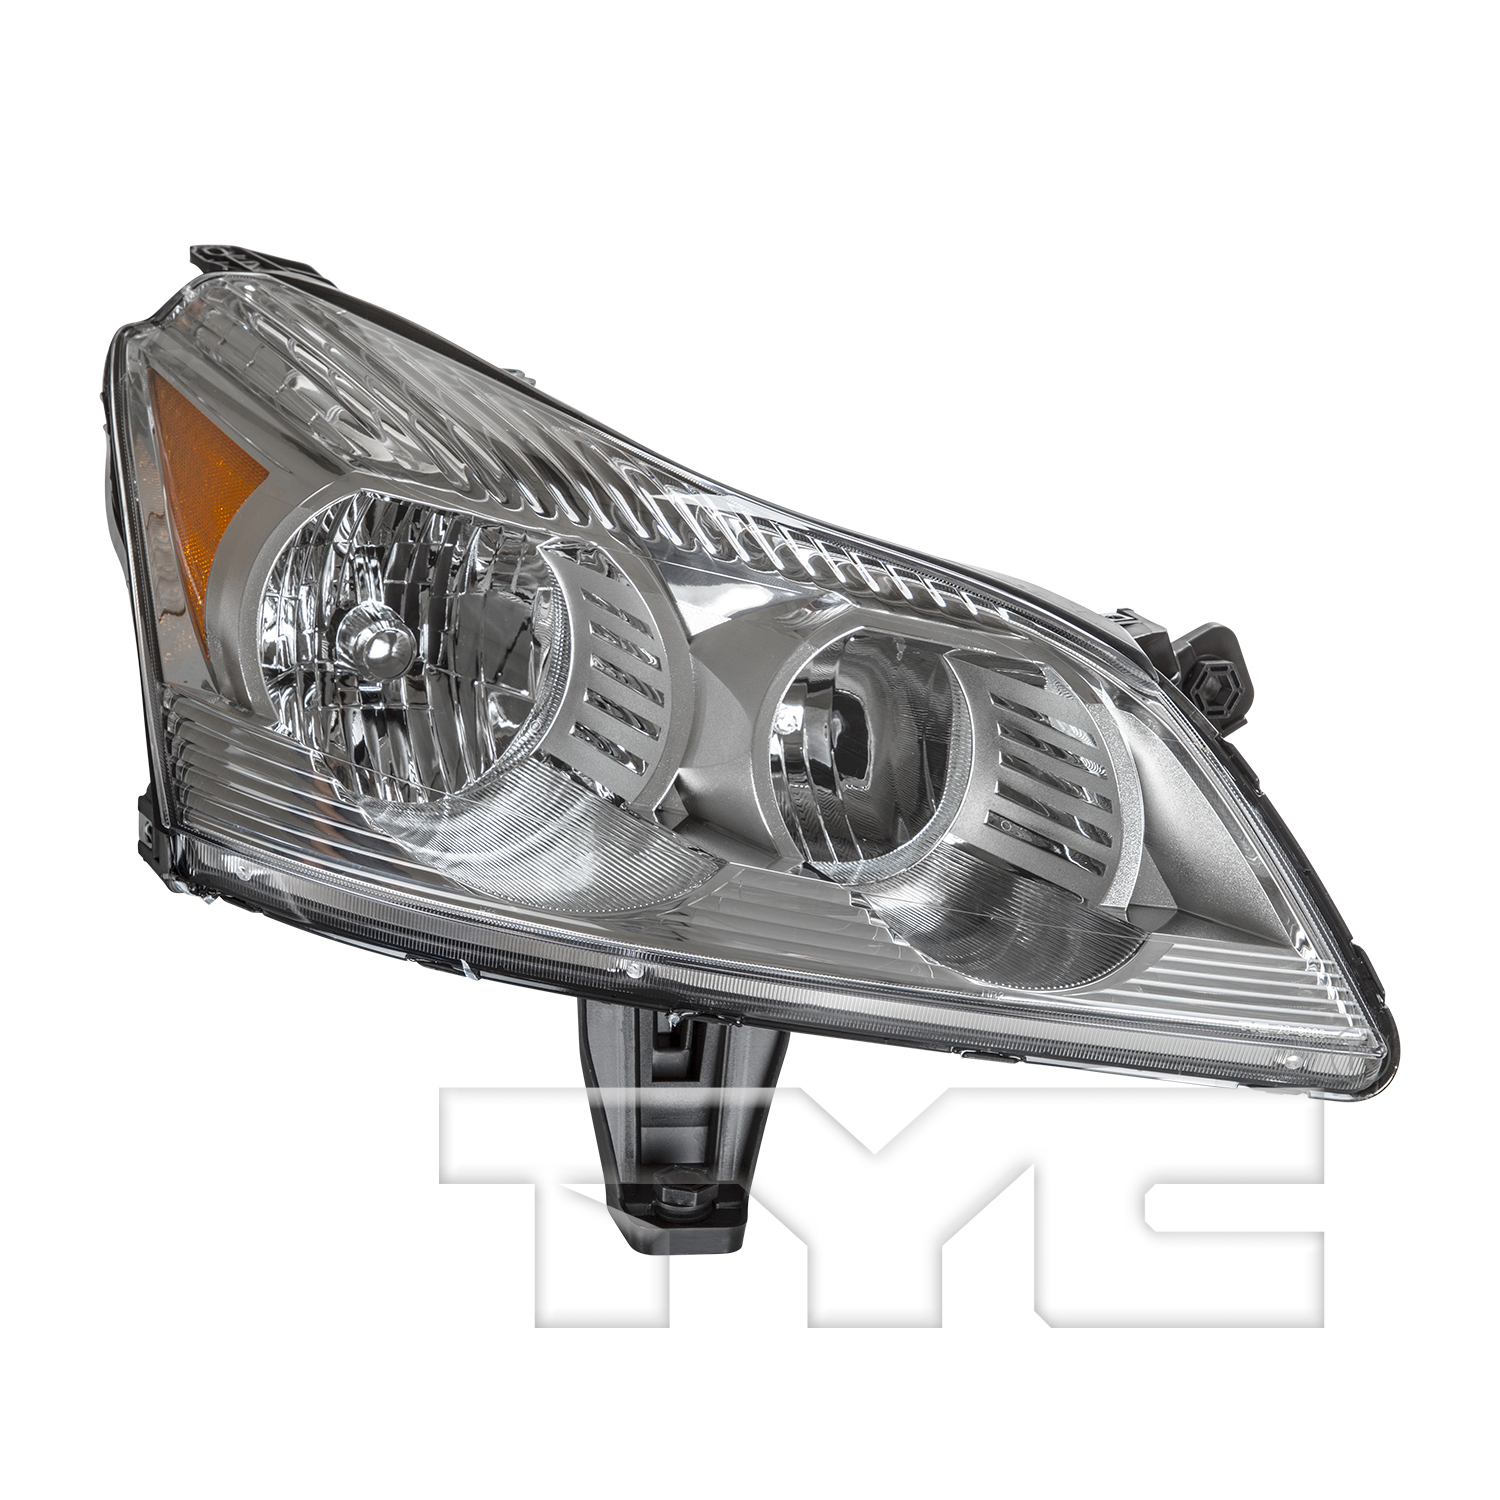 Aftermarket HEADLIGHTS for CHEVROLET - TRAVERSE, TRAVERSE,09-12,RT Headlamp assy composite